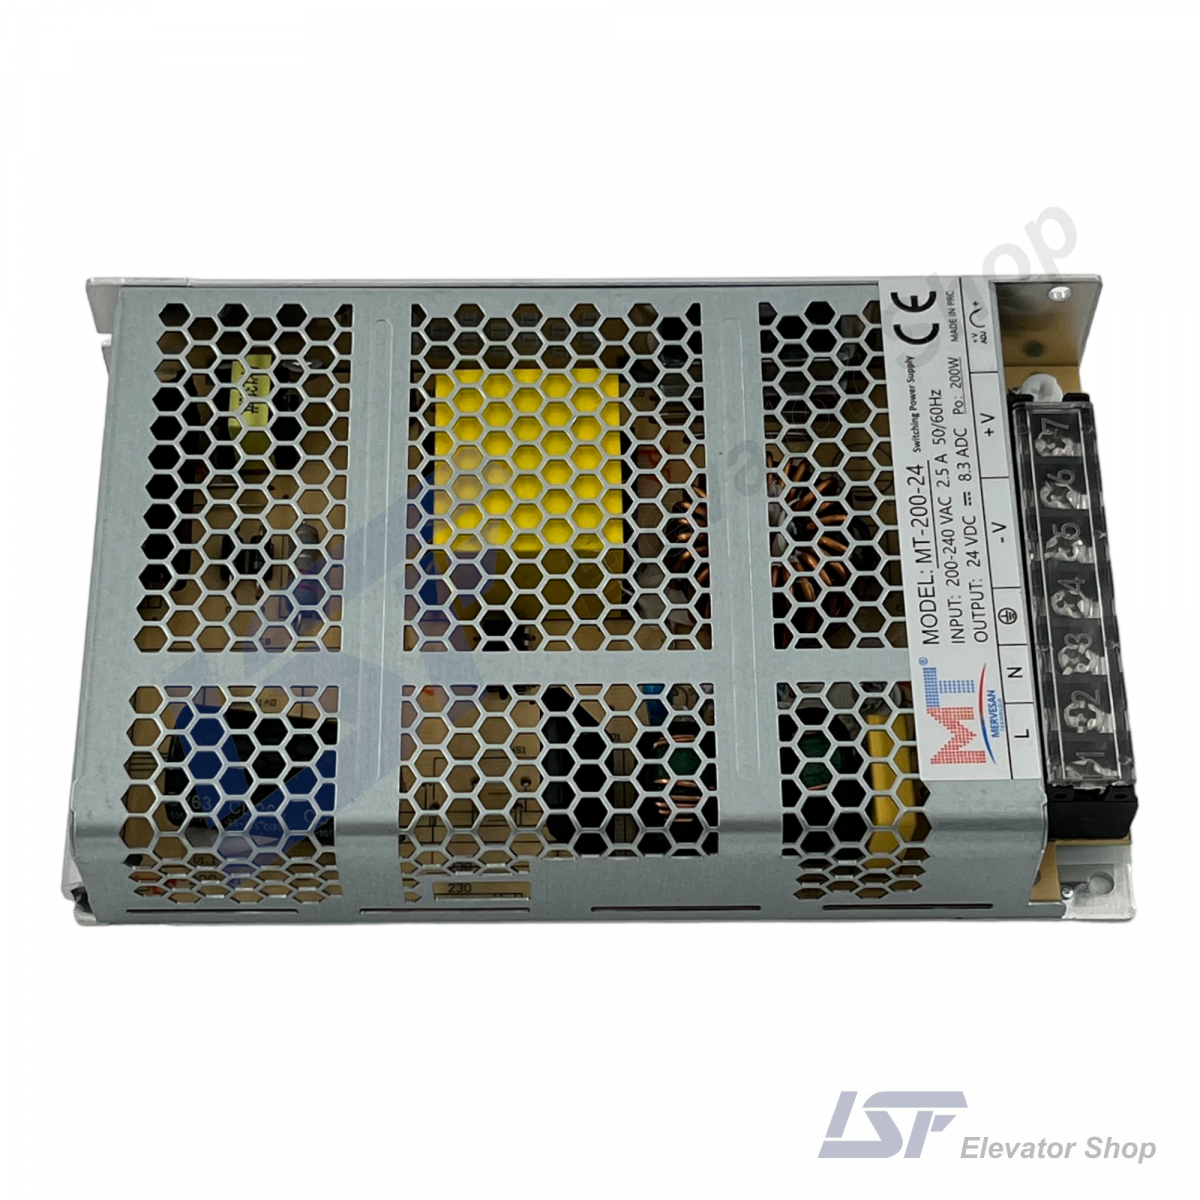 Switching Power Supply MT-200-24 for Elevator (2)